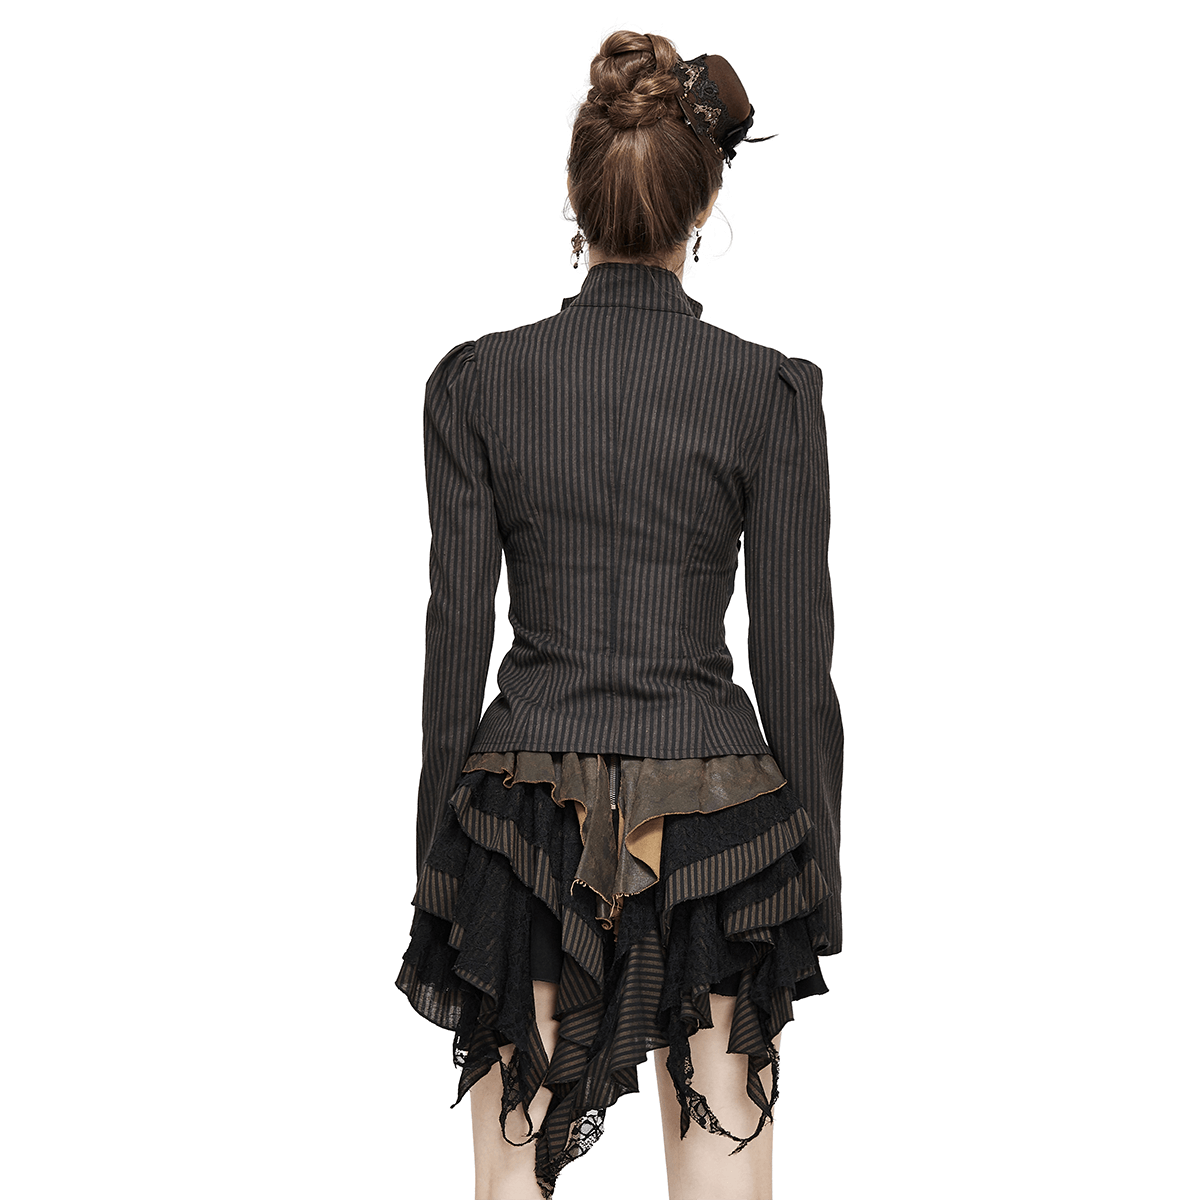 Steampunk Striped Long Sleeves Shirt / Women's Brown Blouse with Buckle Belts - HARD'N'HEAVY